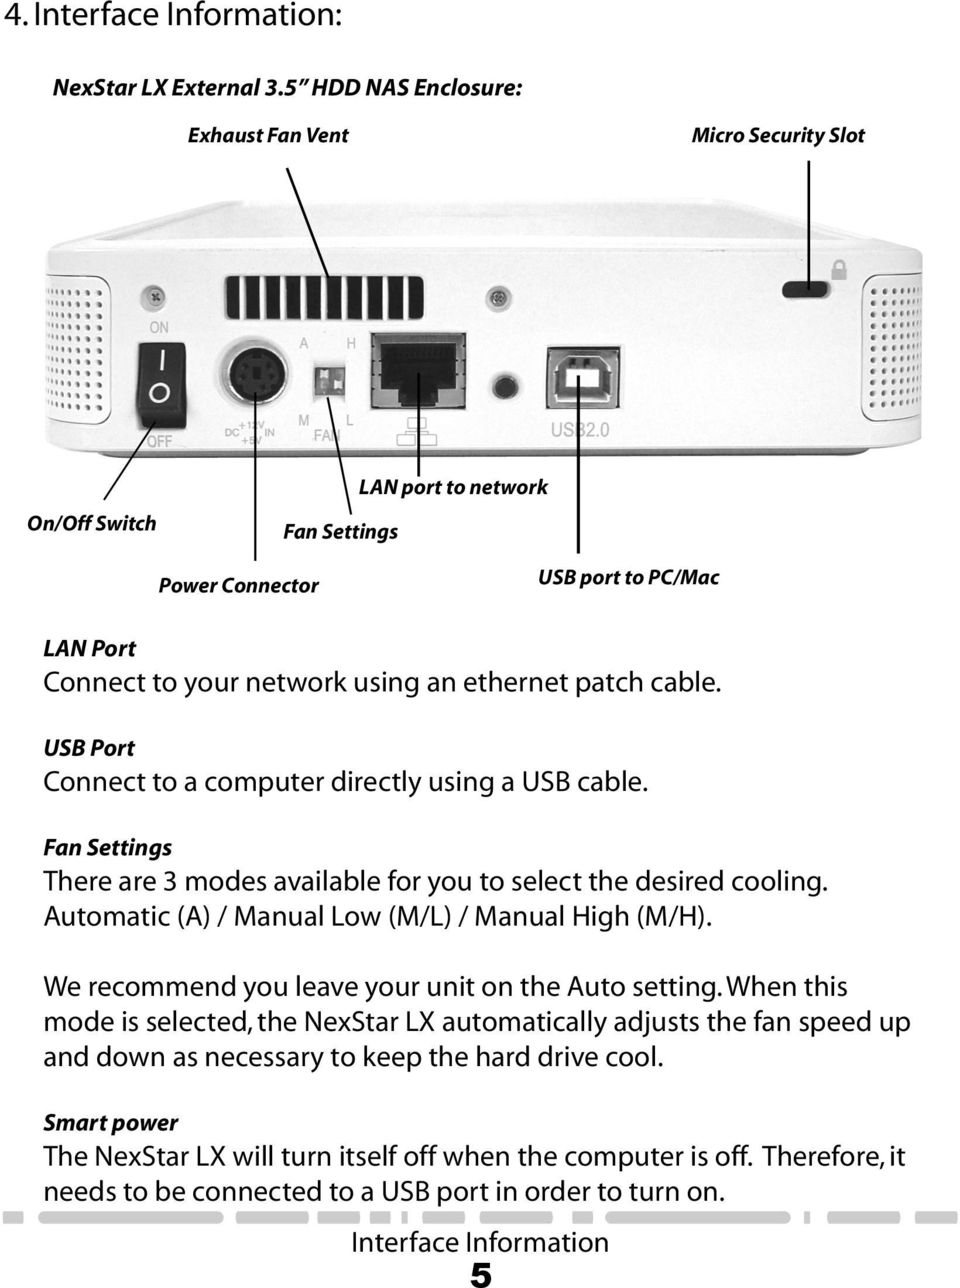 cable. USB Port Connect to a computer directly using a USB cable. Fan Settings There are 3 modes available for you to select the desired cooling. Automatic (A) / Manual Low (M/L) / Manual High (M/H).